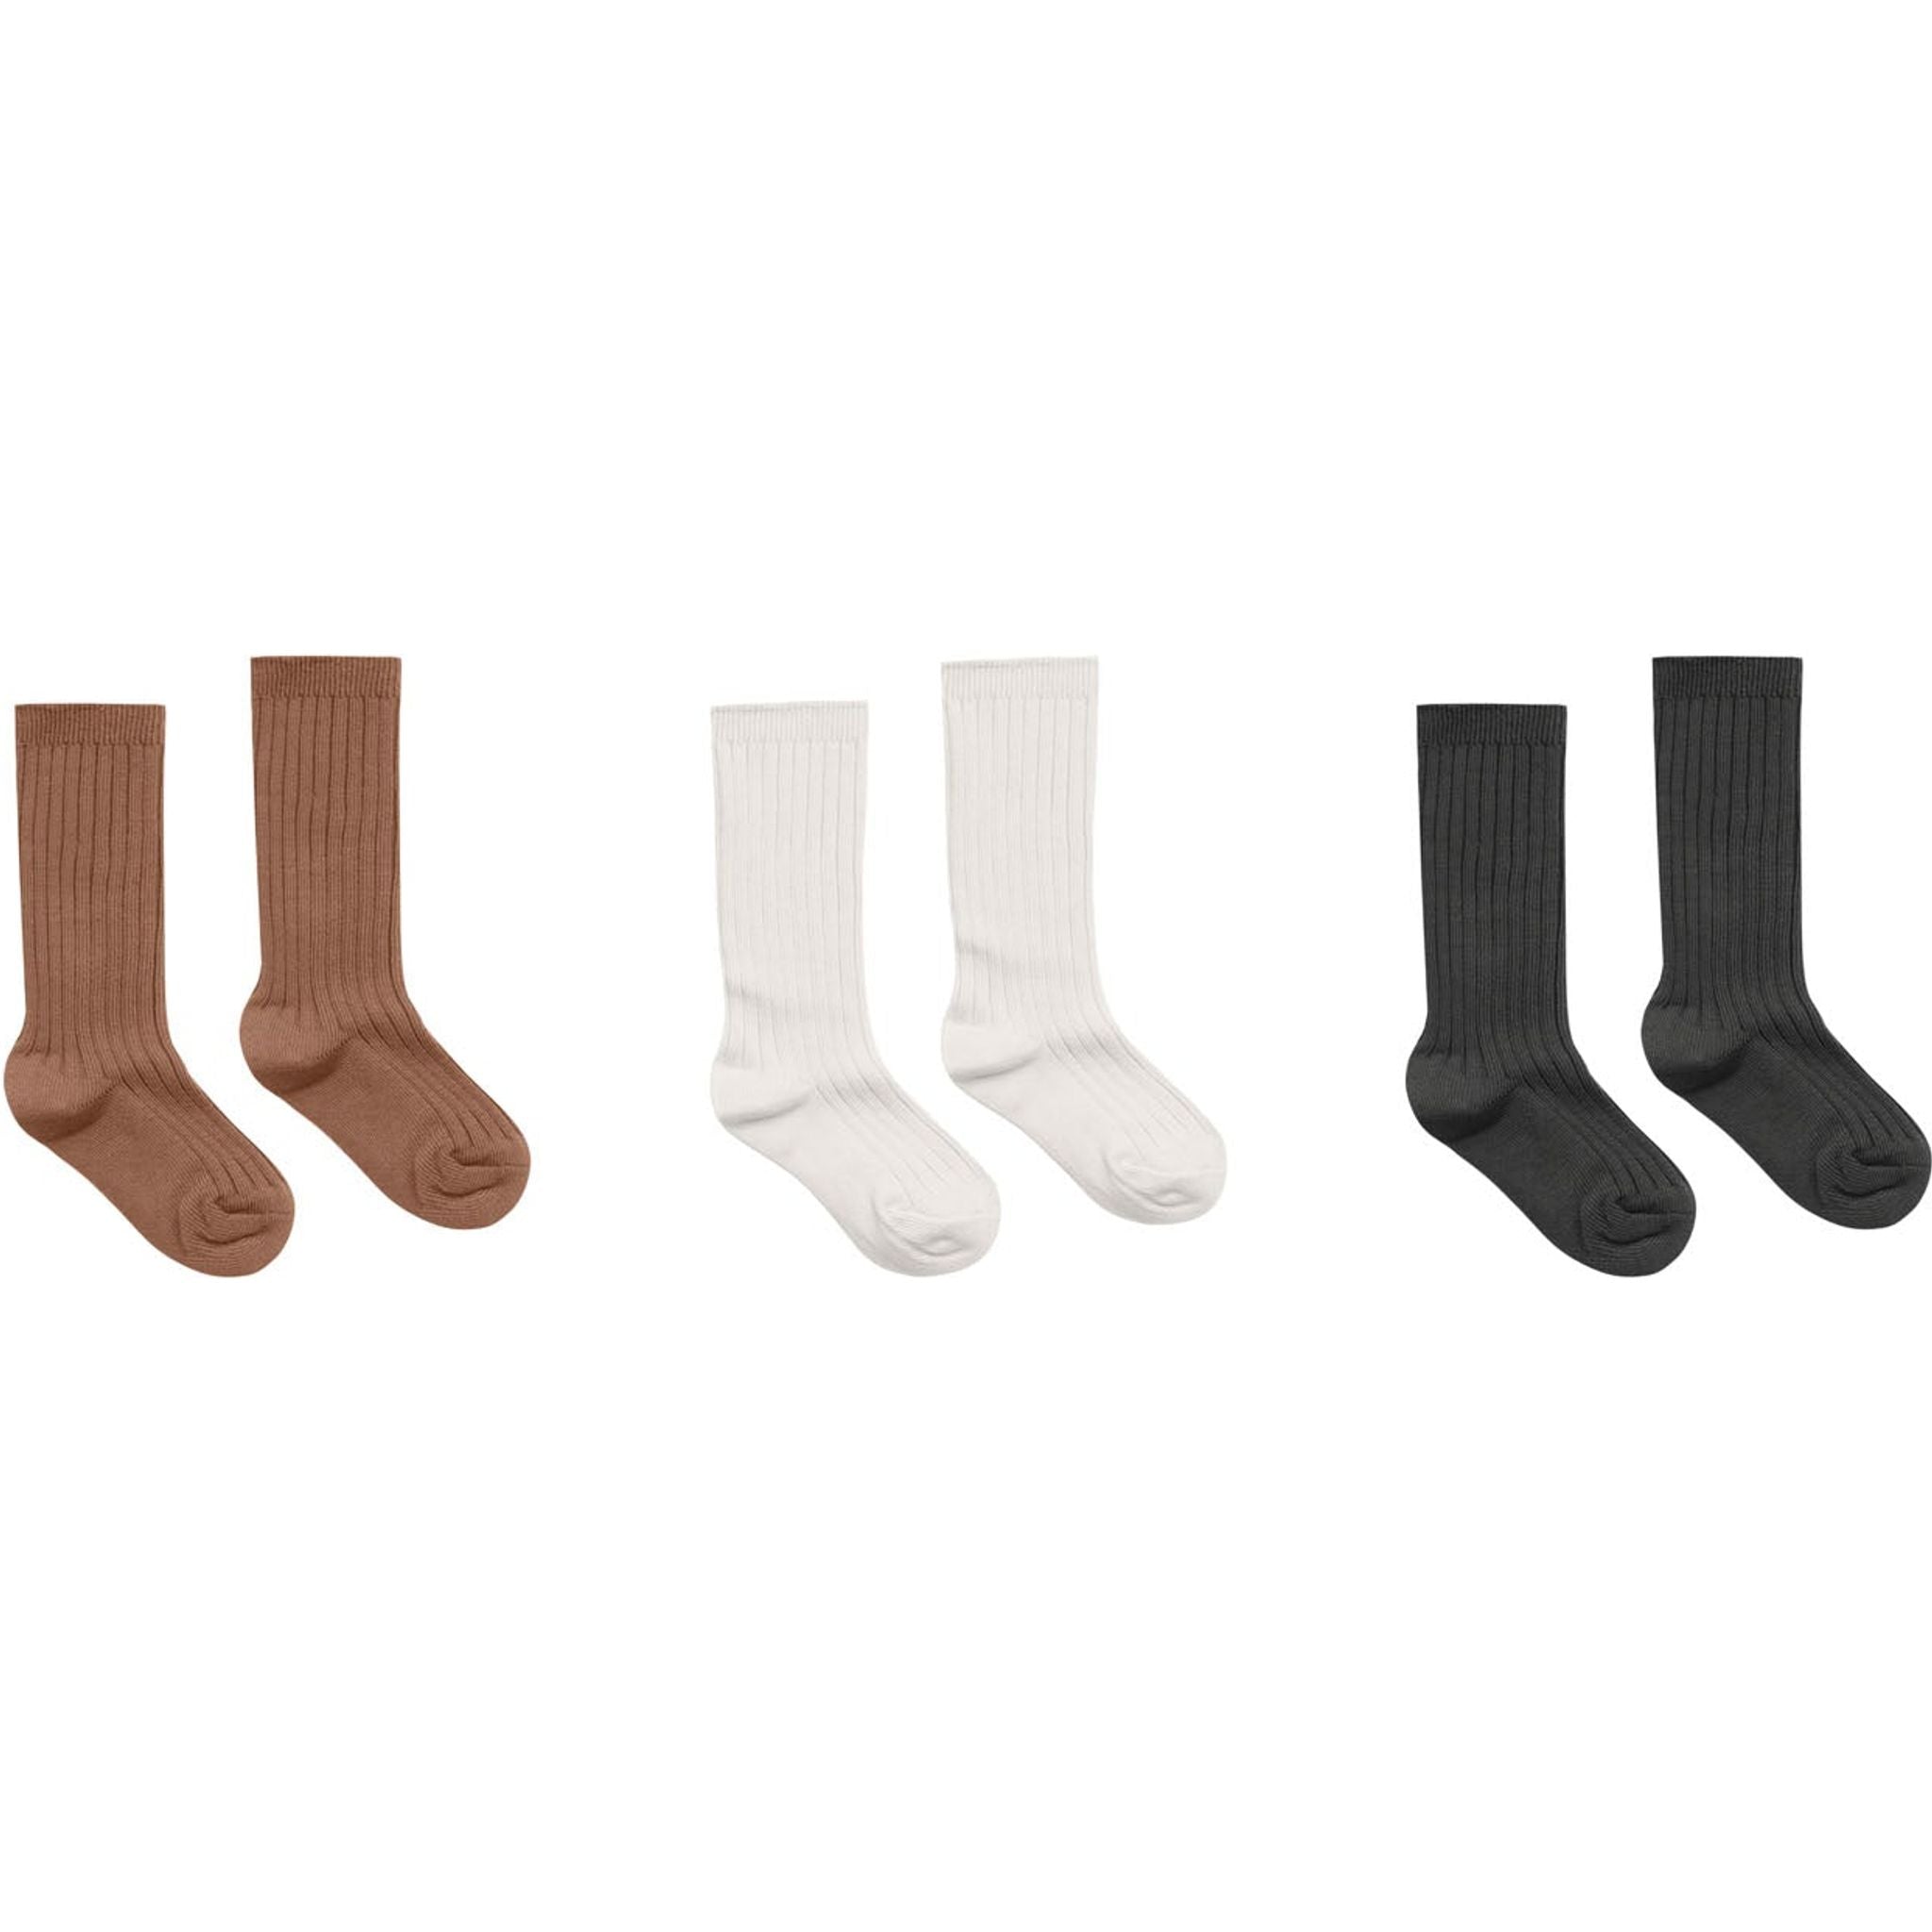 three pack of ribbed knit knee high socks in cedar color, ivory and black